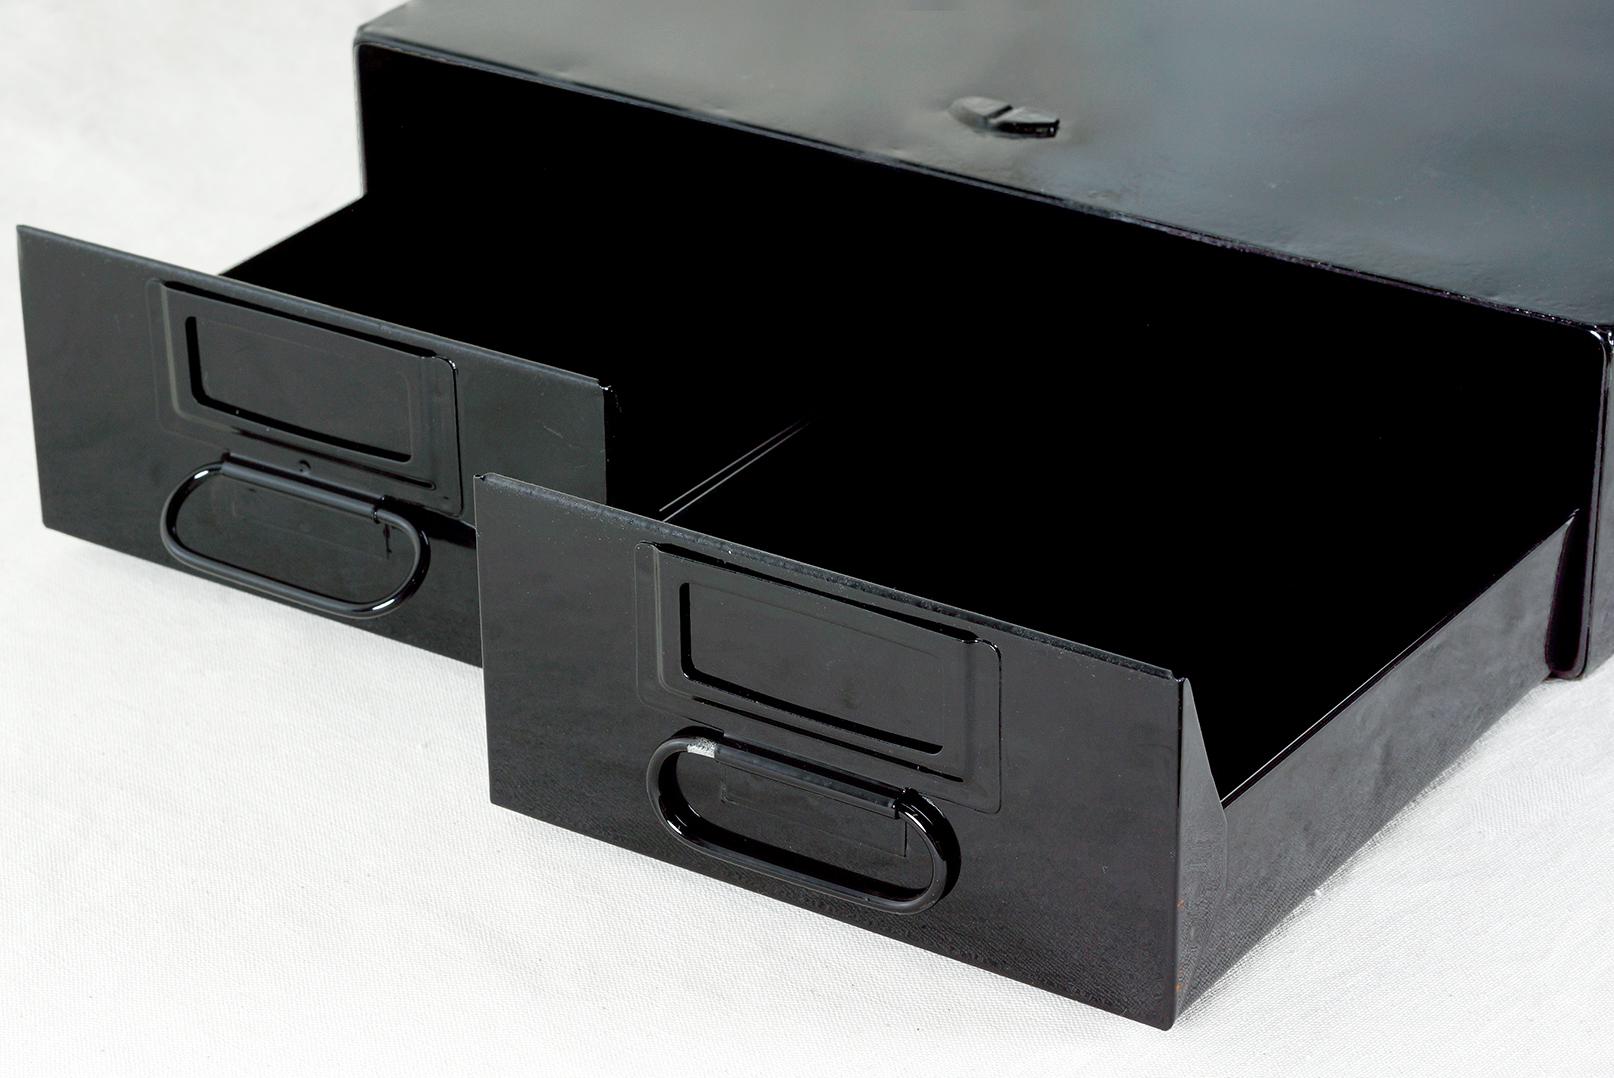 1940s card catalog filing unit with two deep, side by side pull-out drawers. Newly refinished steel in gloss black. This heavy-duty organizational unit is perfect for storing anything from office supplies to recipe cards. Great for stacking. 4